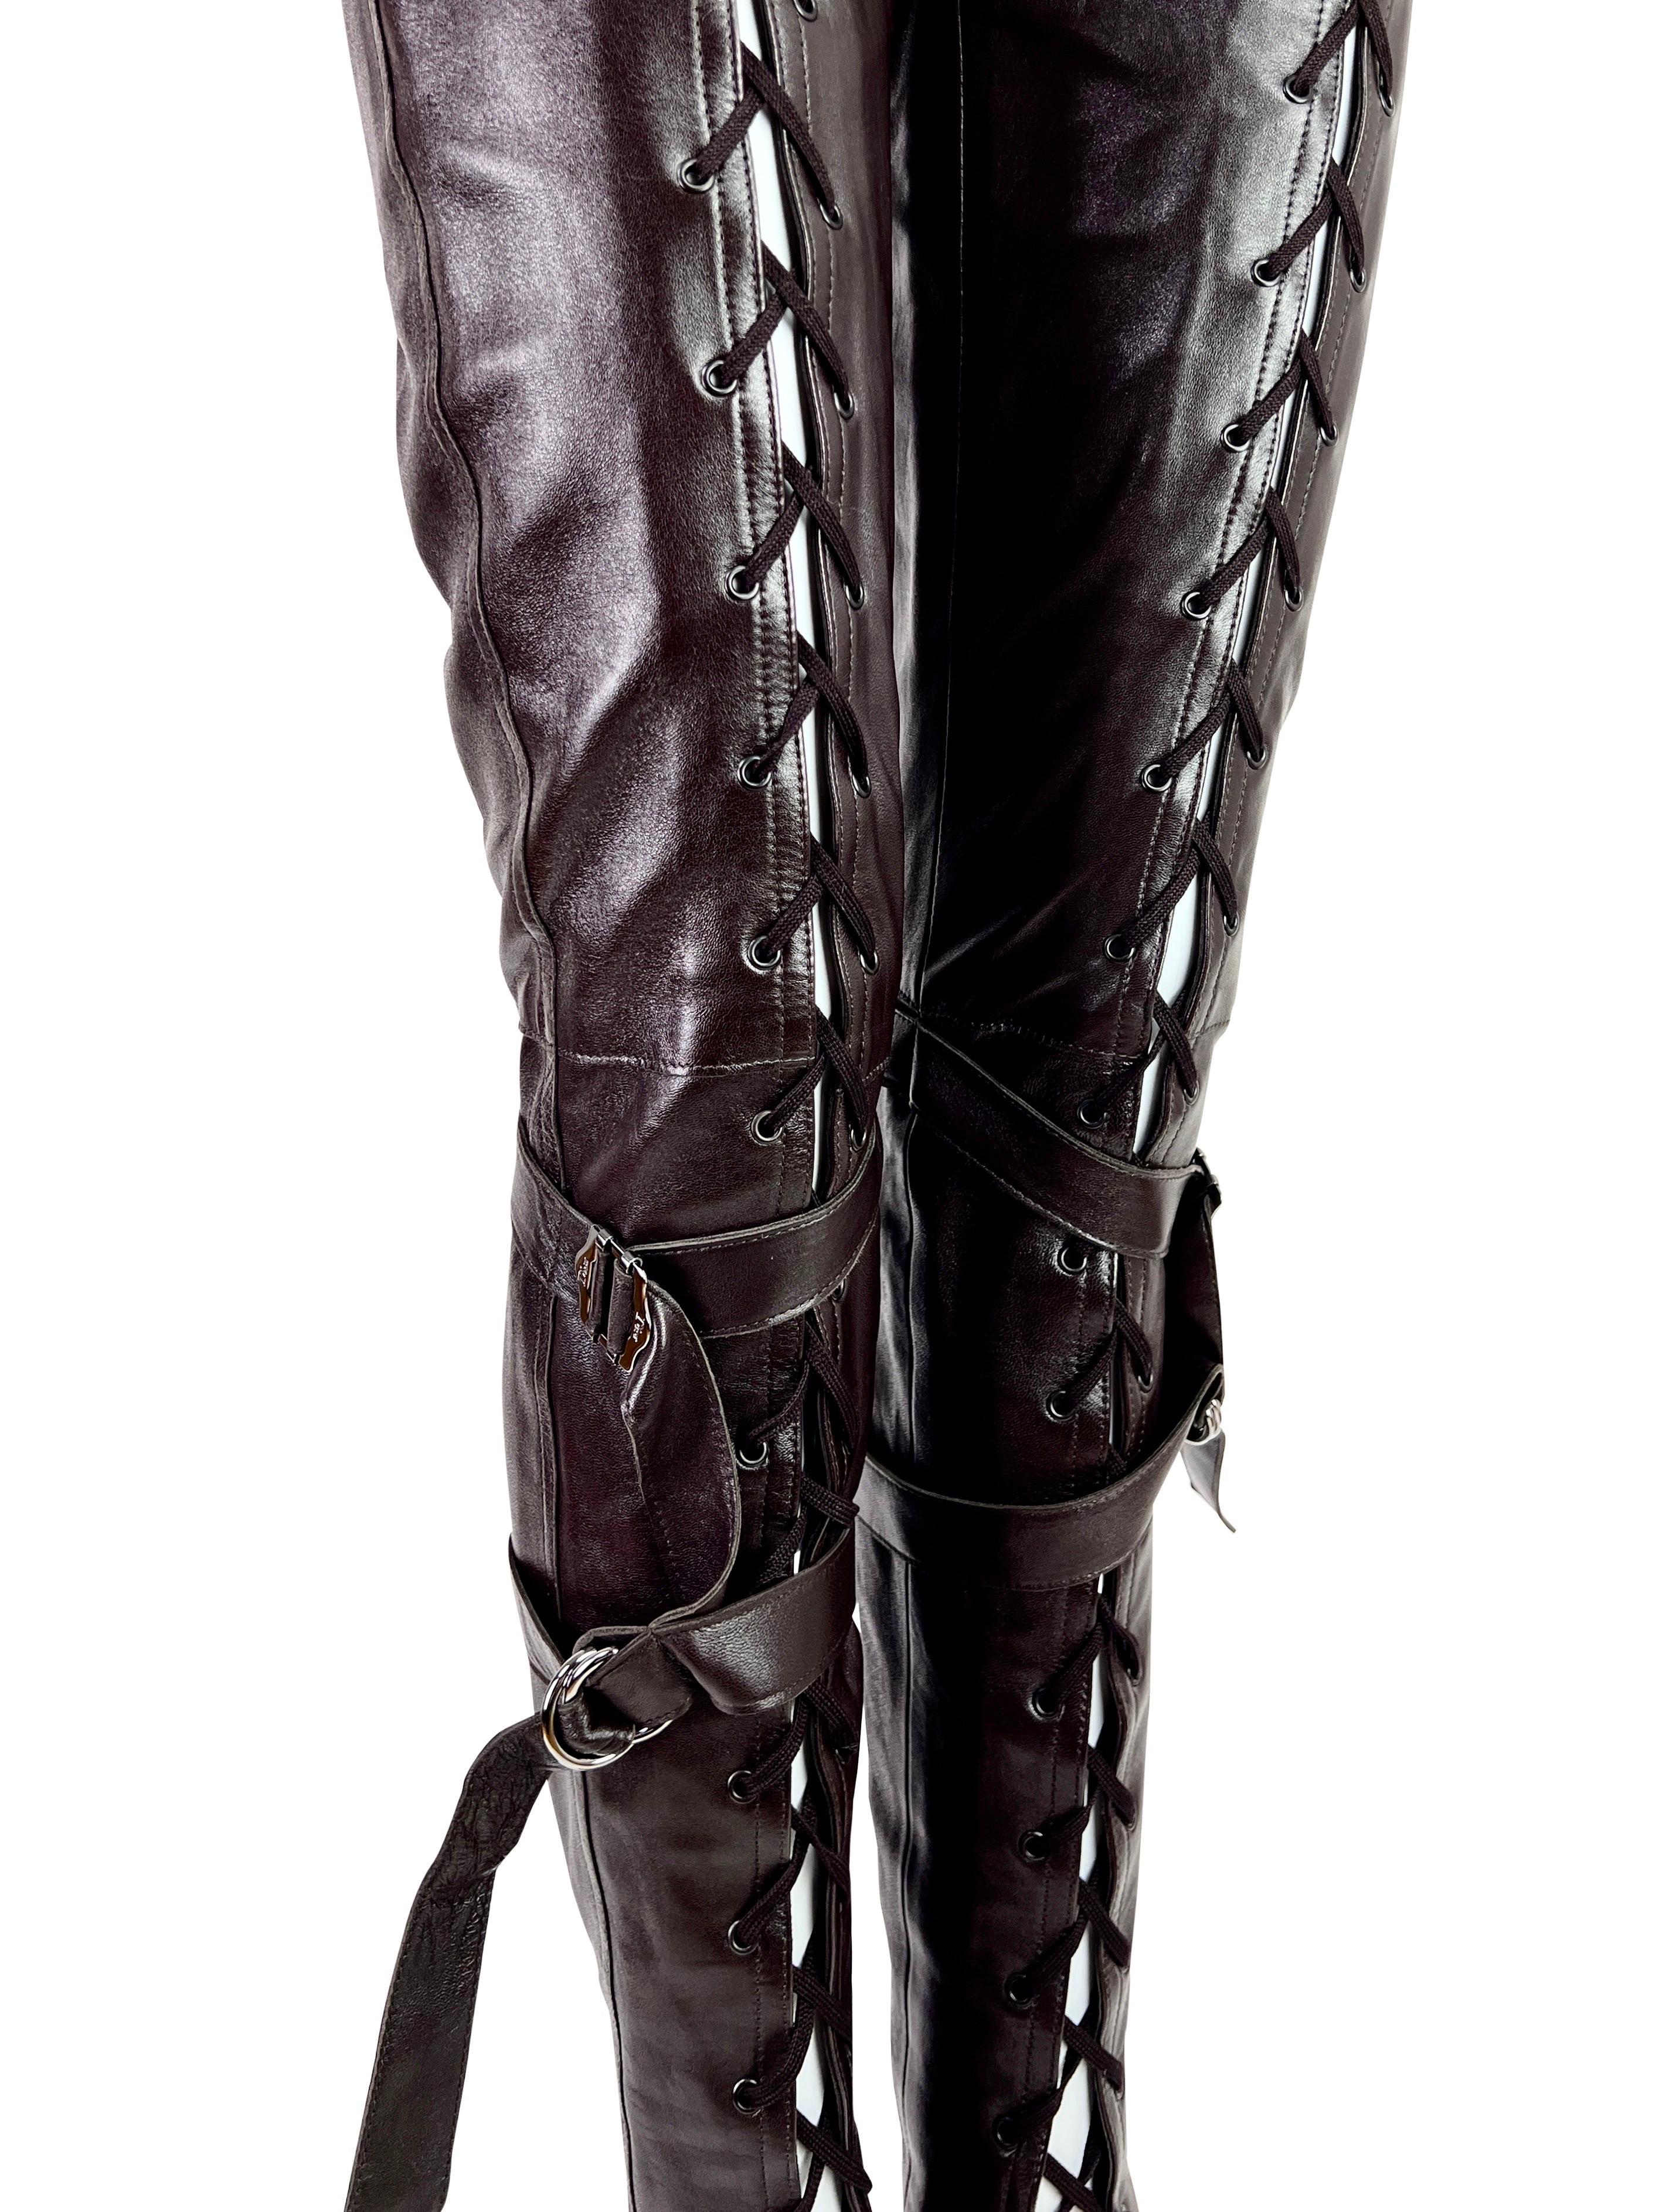 Dior by John Galliano Fall 2003 Leather Lace-Up Pants in Dark Chocolate For Sale 5